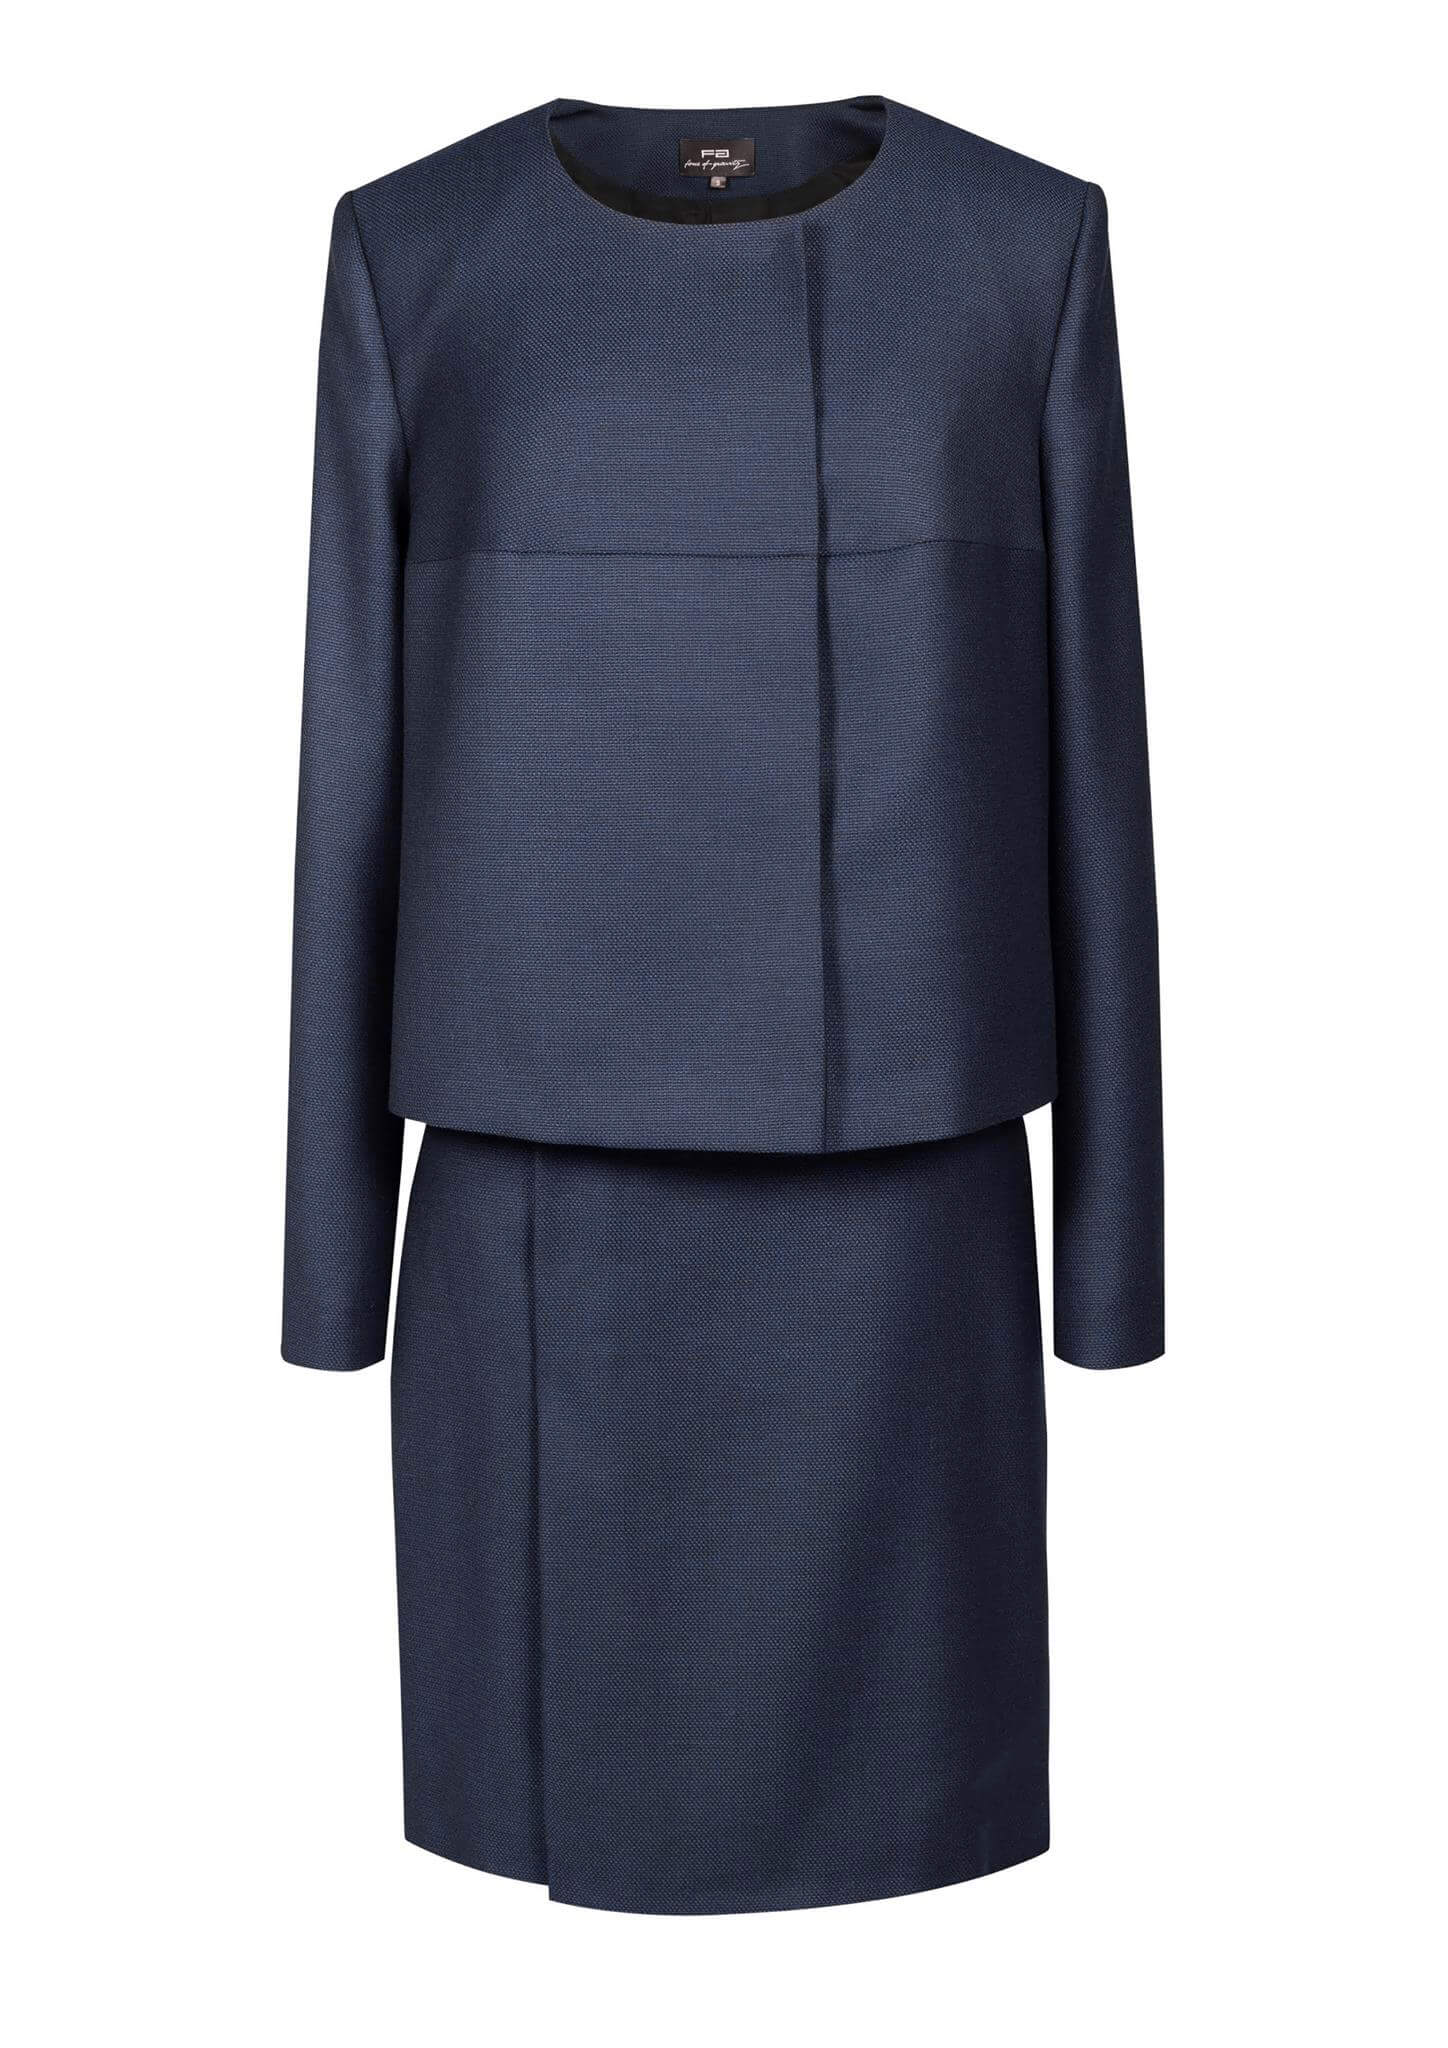 Navy Blue Wool Skirt Suit with Silk Insert 